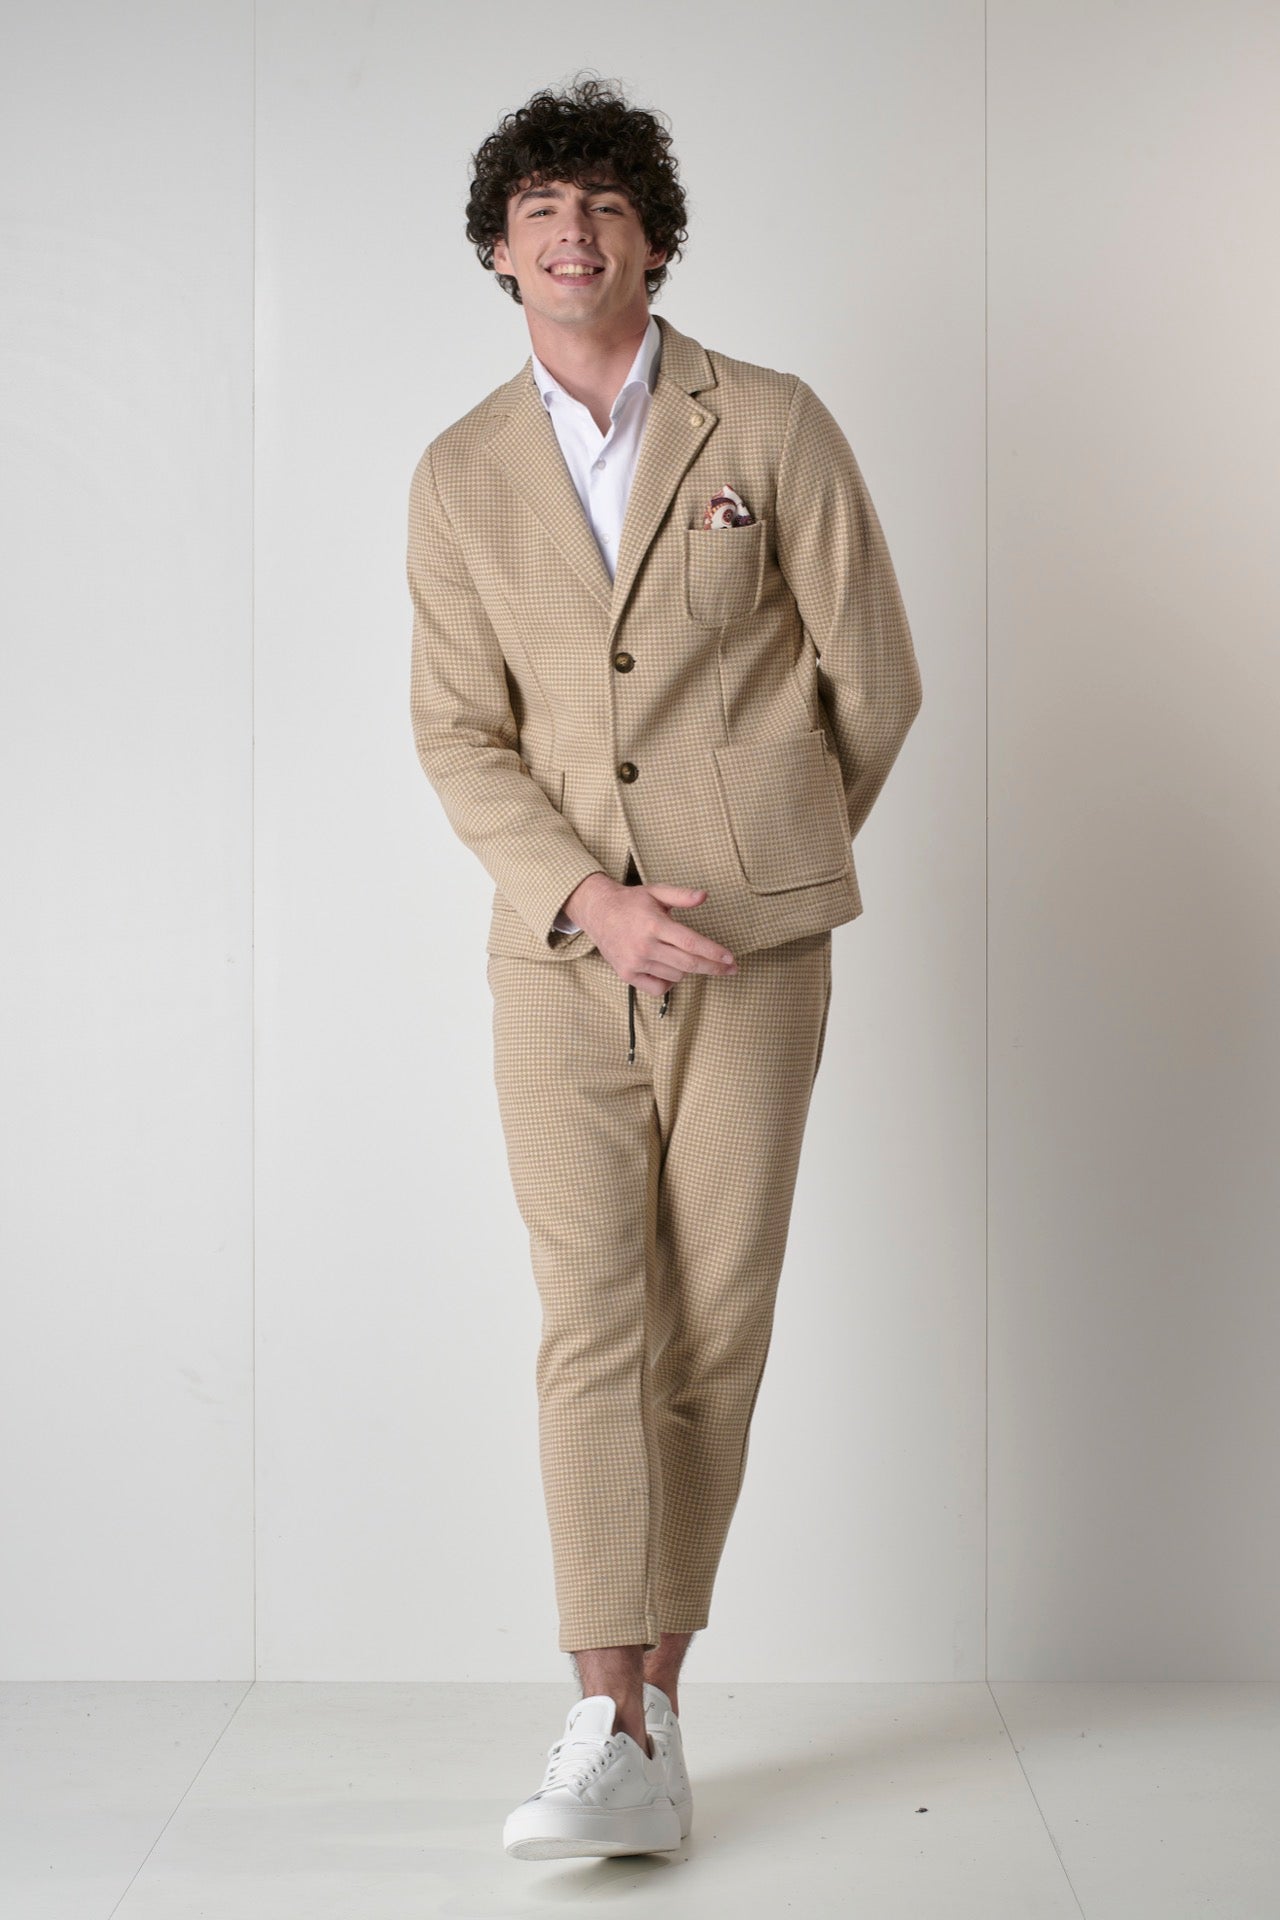 Cream and Camel Houndstooth Tailored Suit